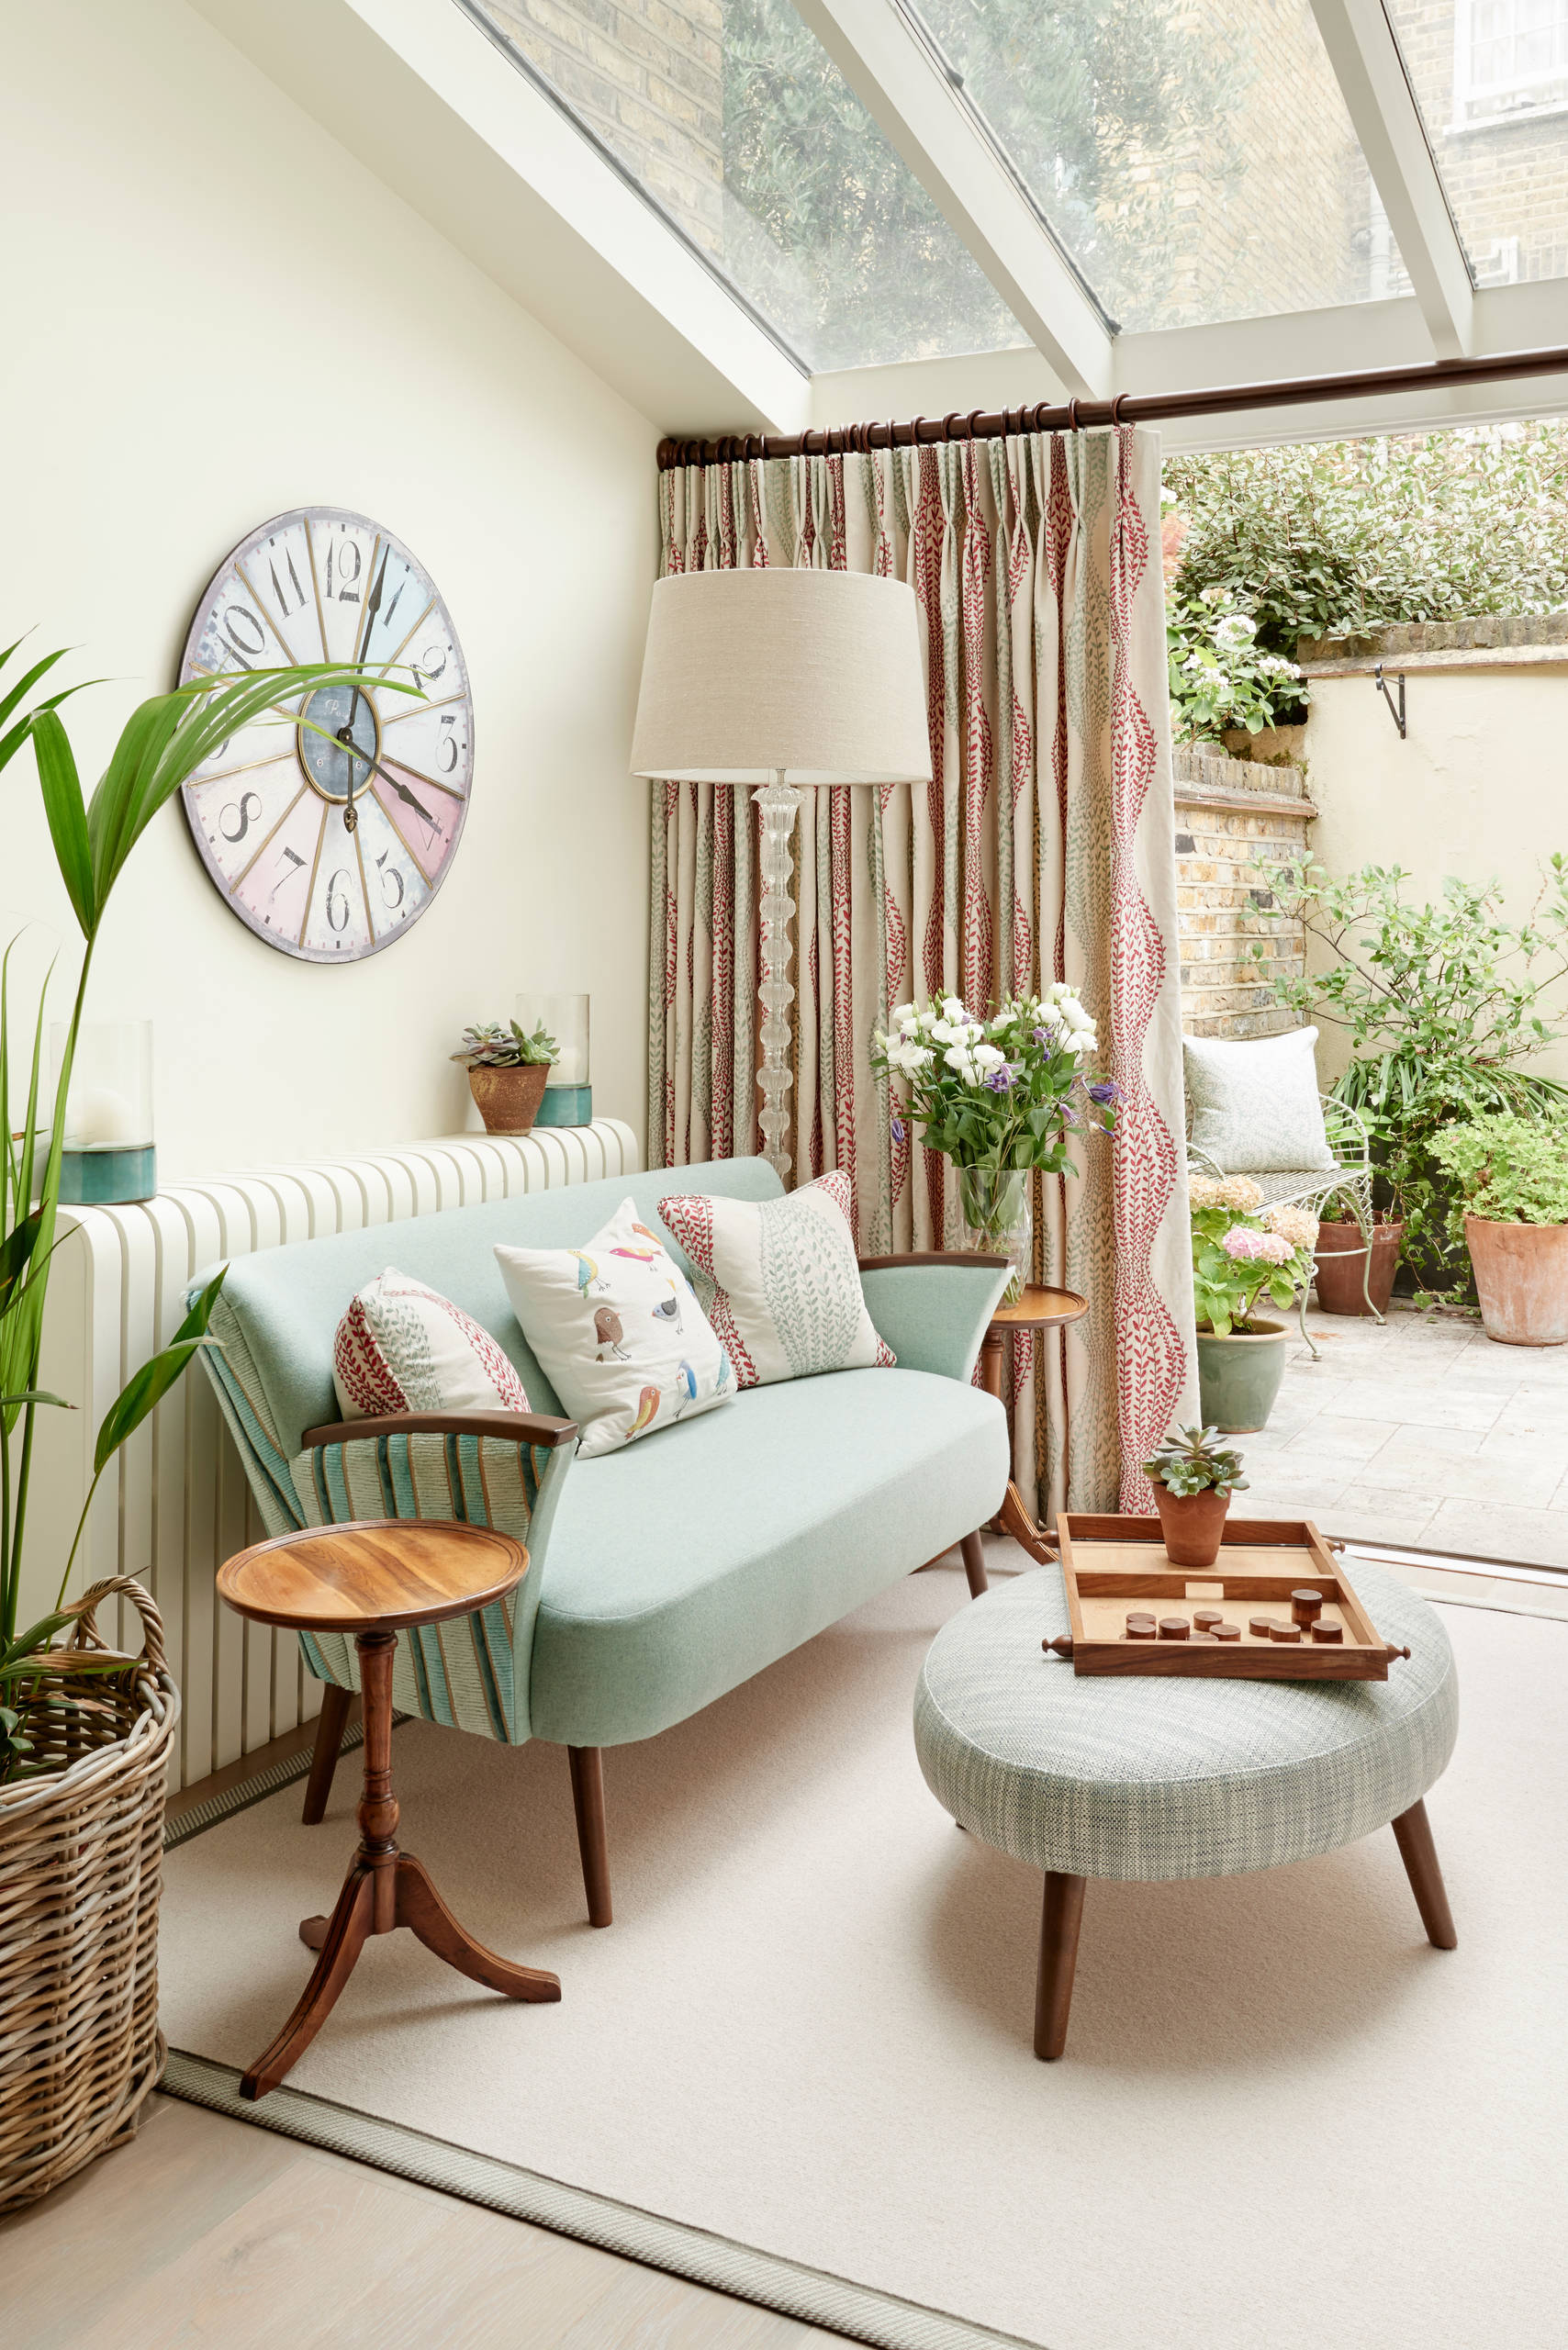 17 Comfy Eclectic Living Room Designs That Are All About The Chic